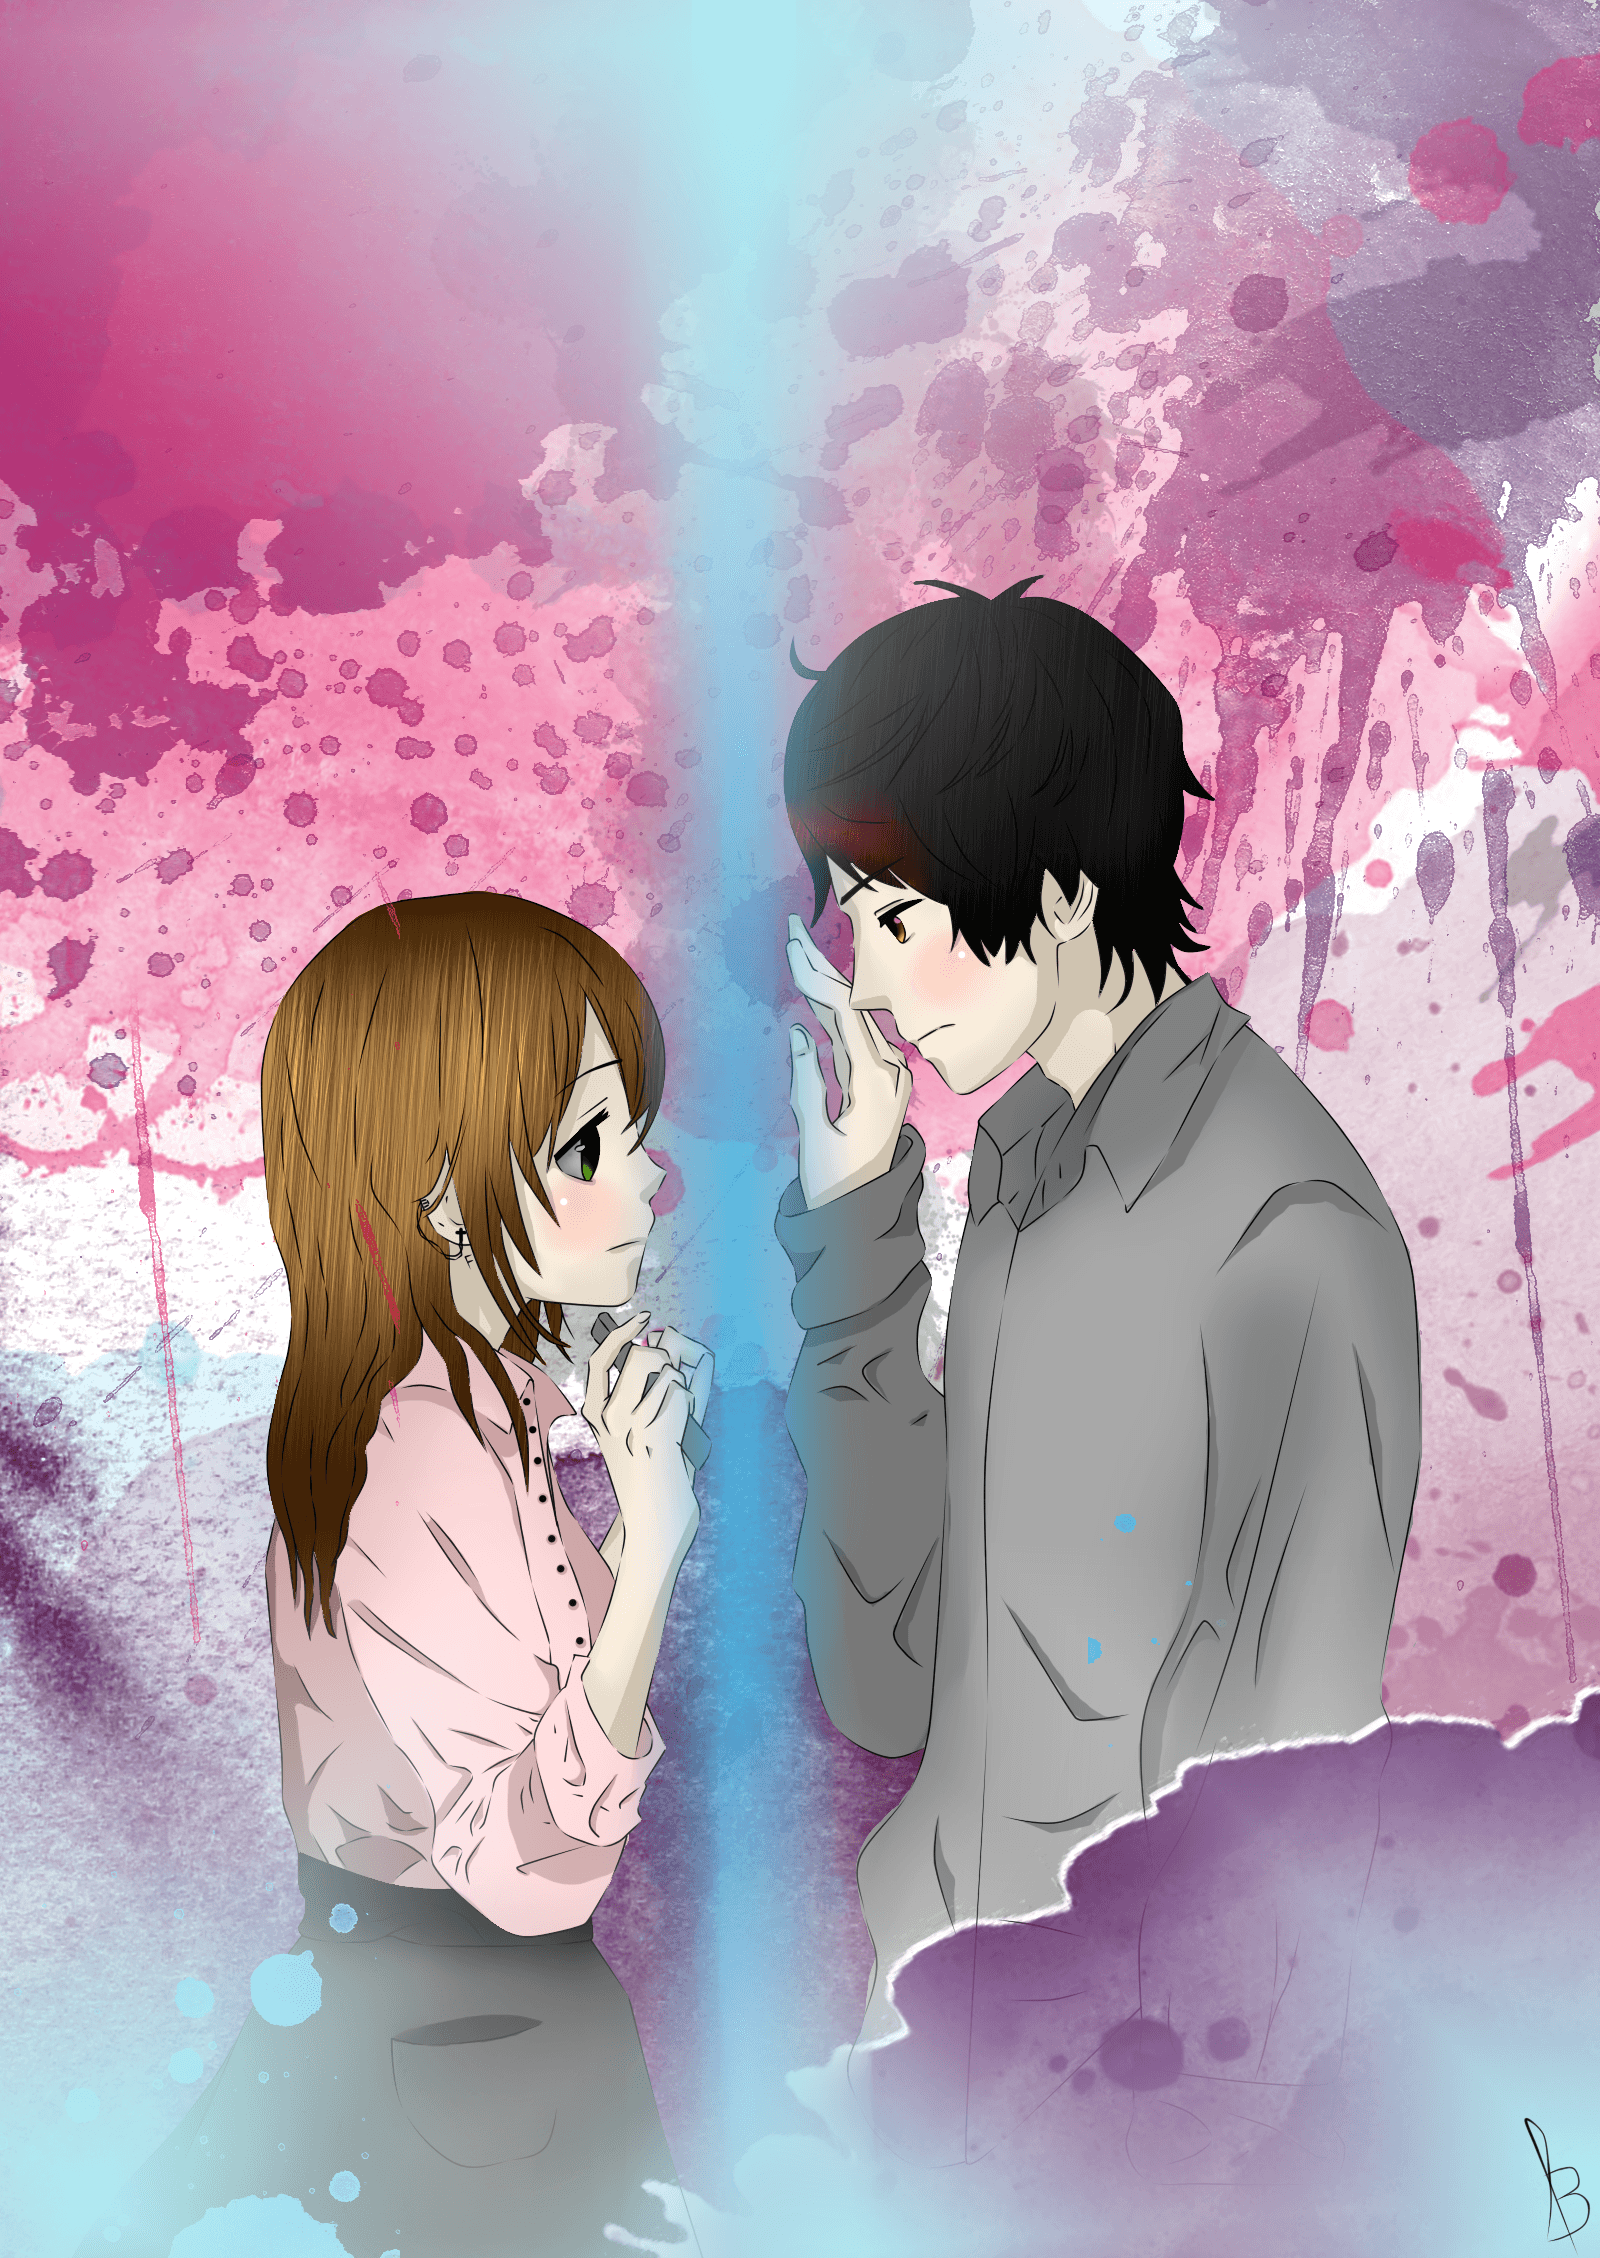 Long Distance Anime Couples Wallpapers on WallpaperDog